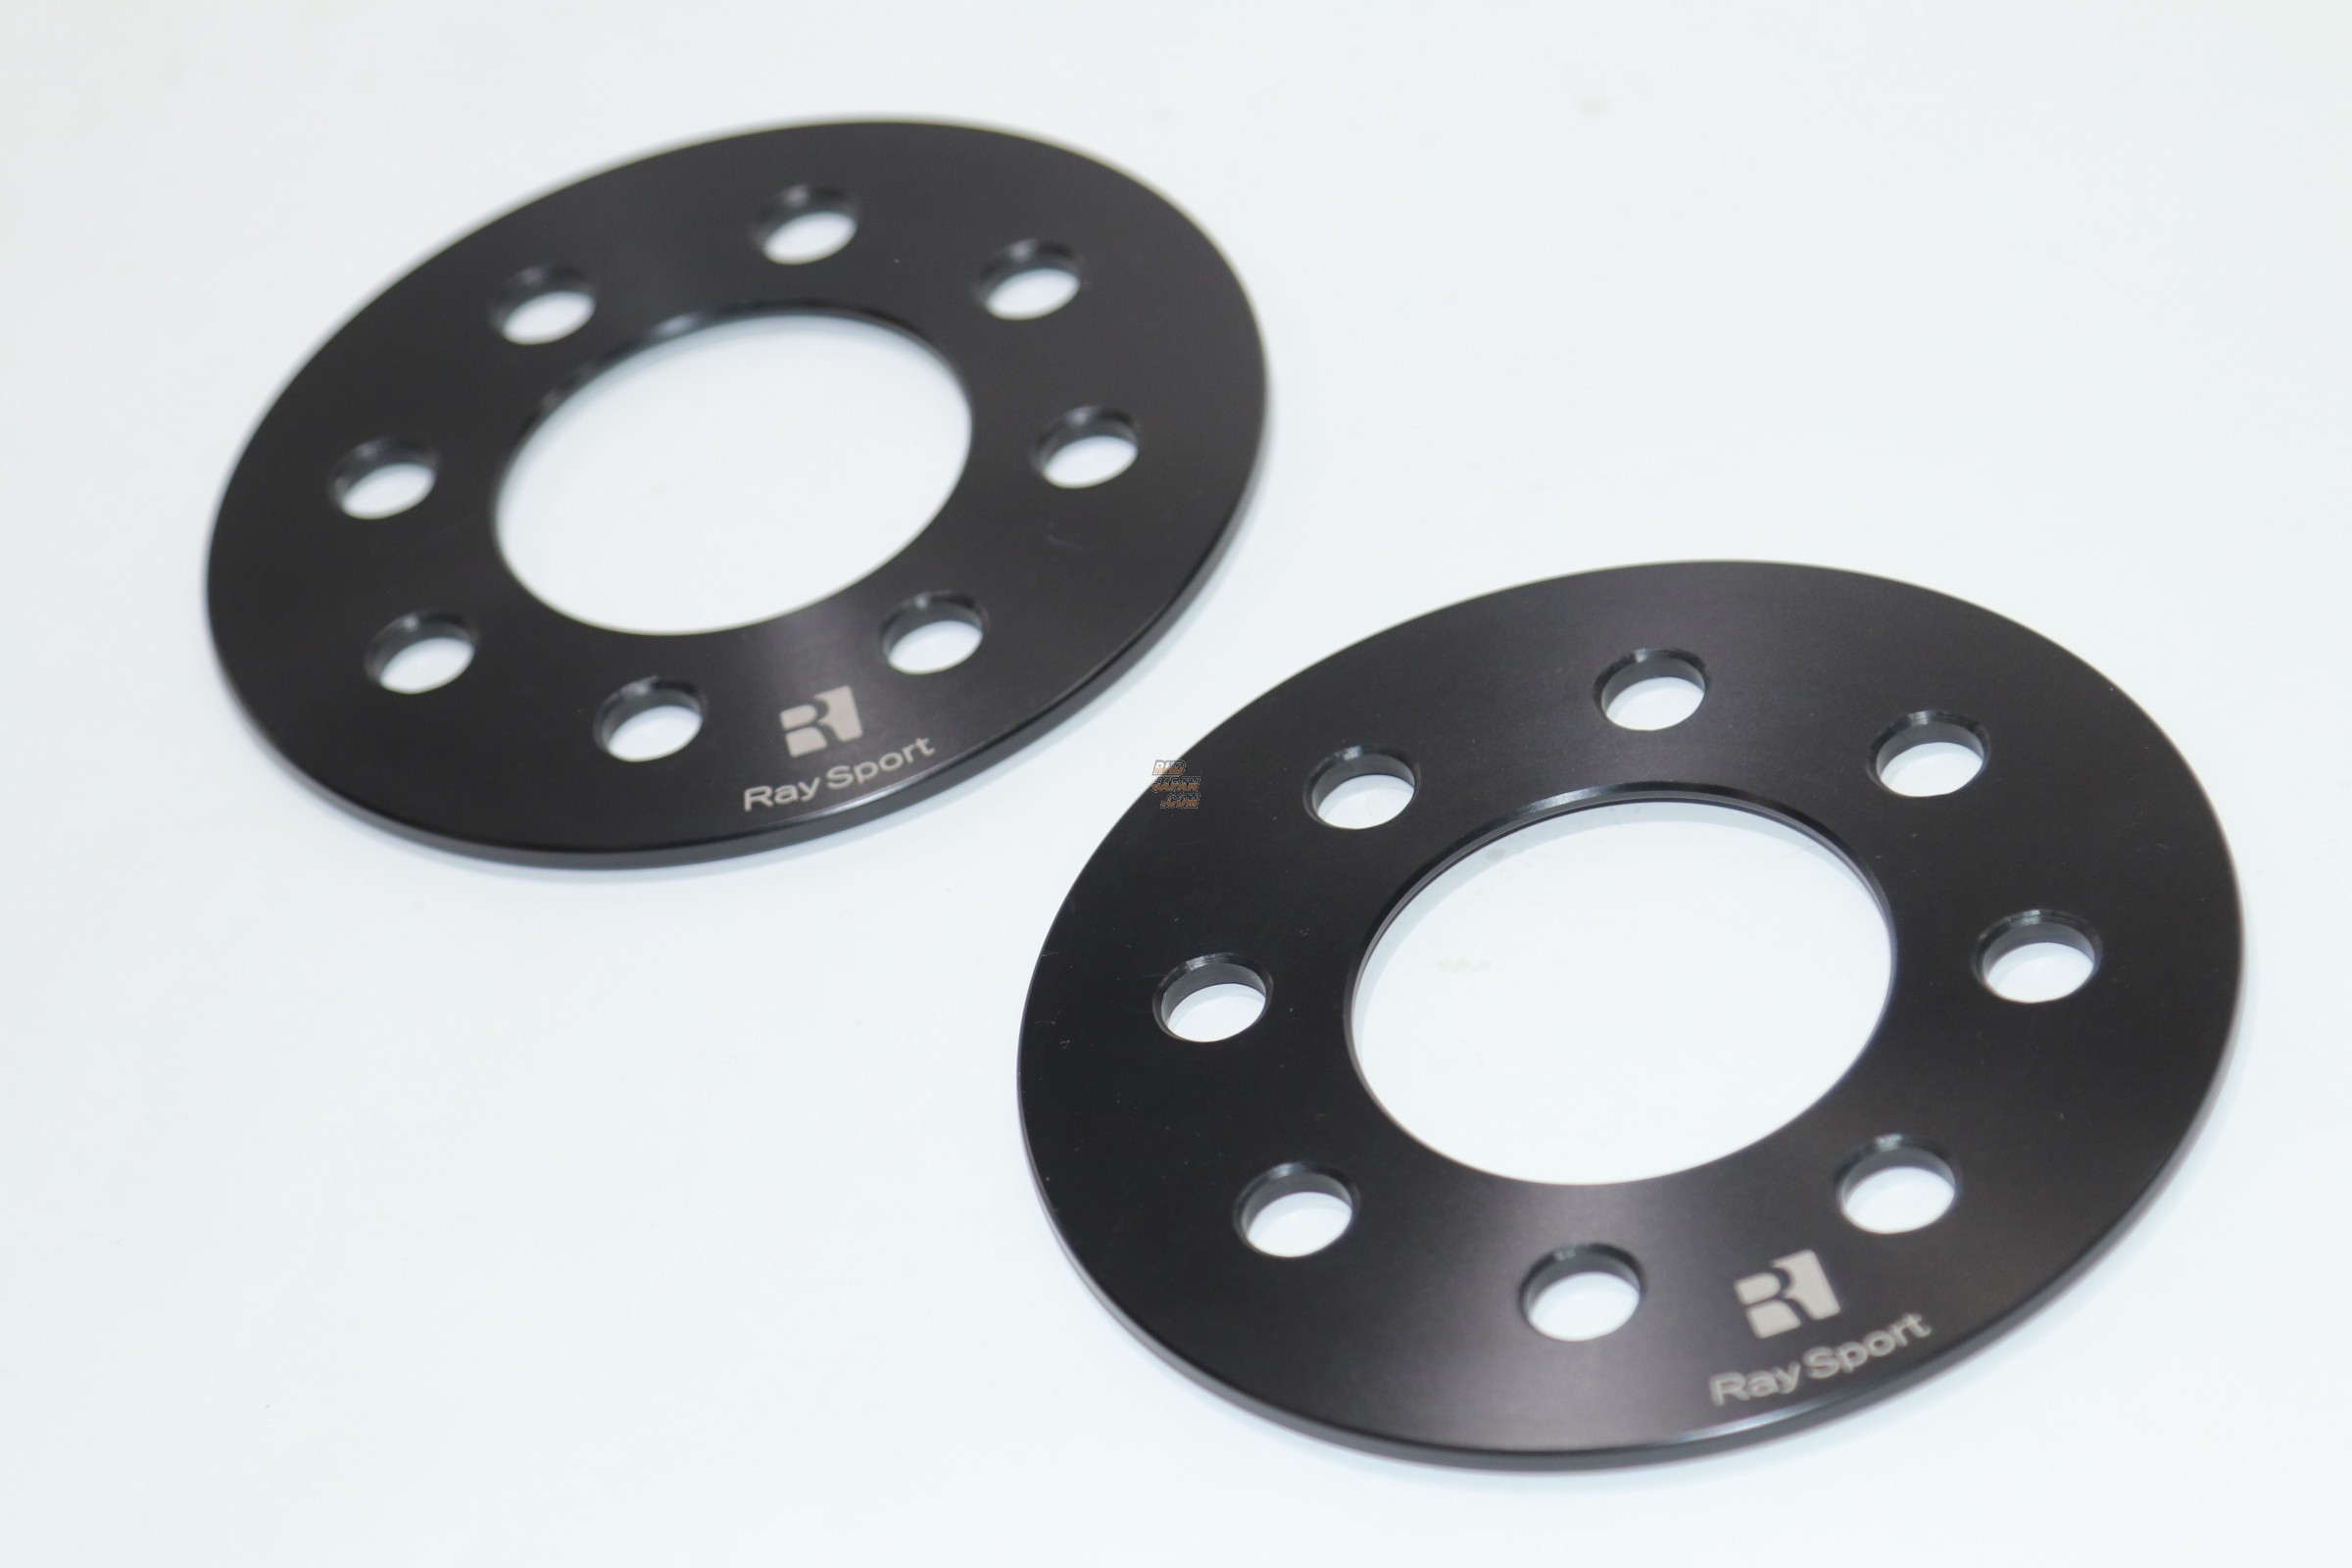 RAYS Ray Sport Wheel Spacer Set -100-4H 5mm